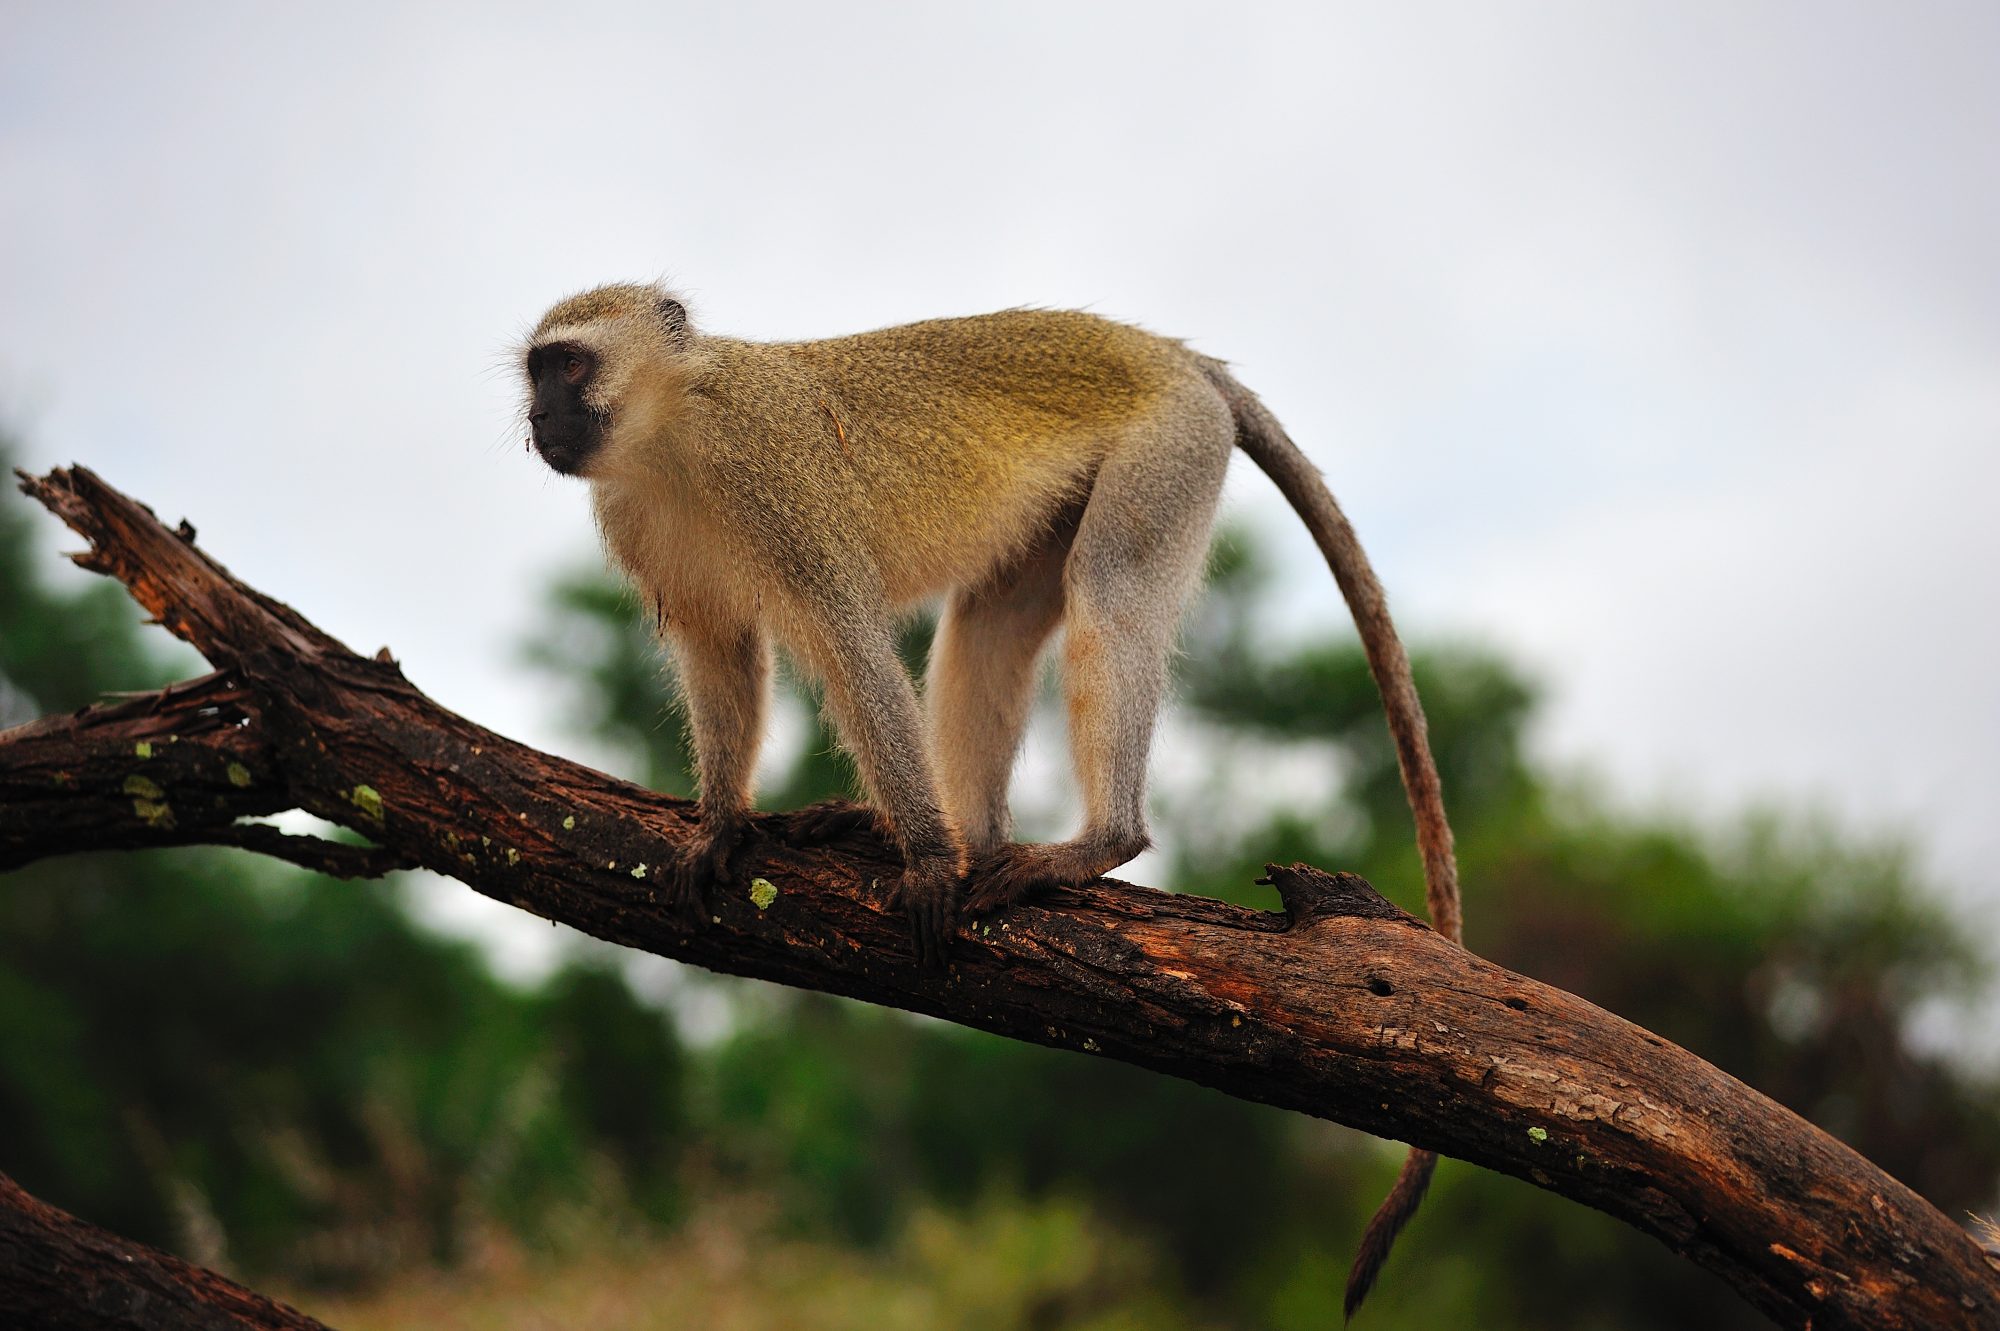 A green monkey climbing on a branch in South Africa